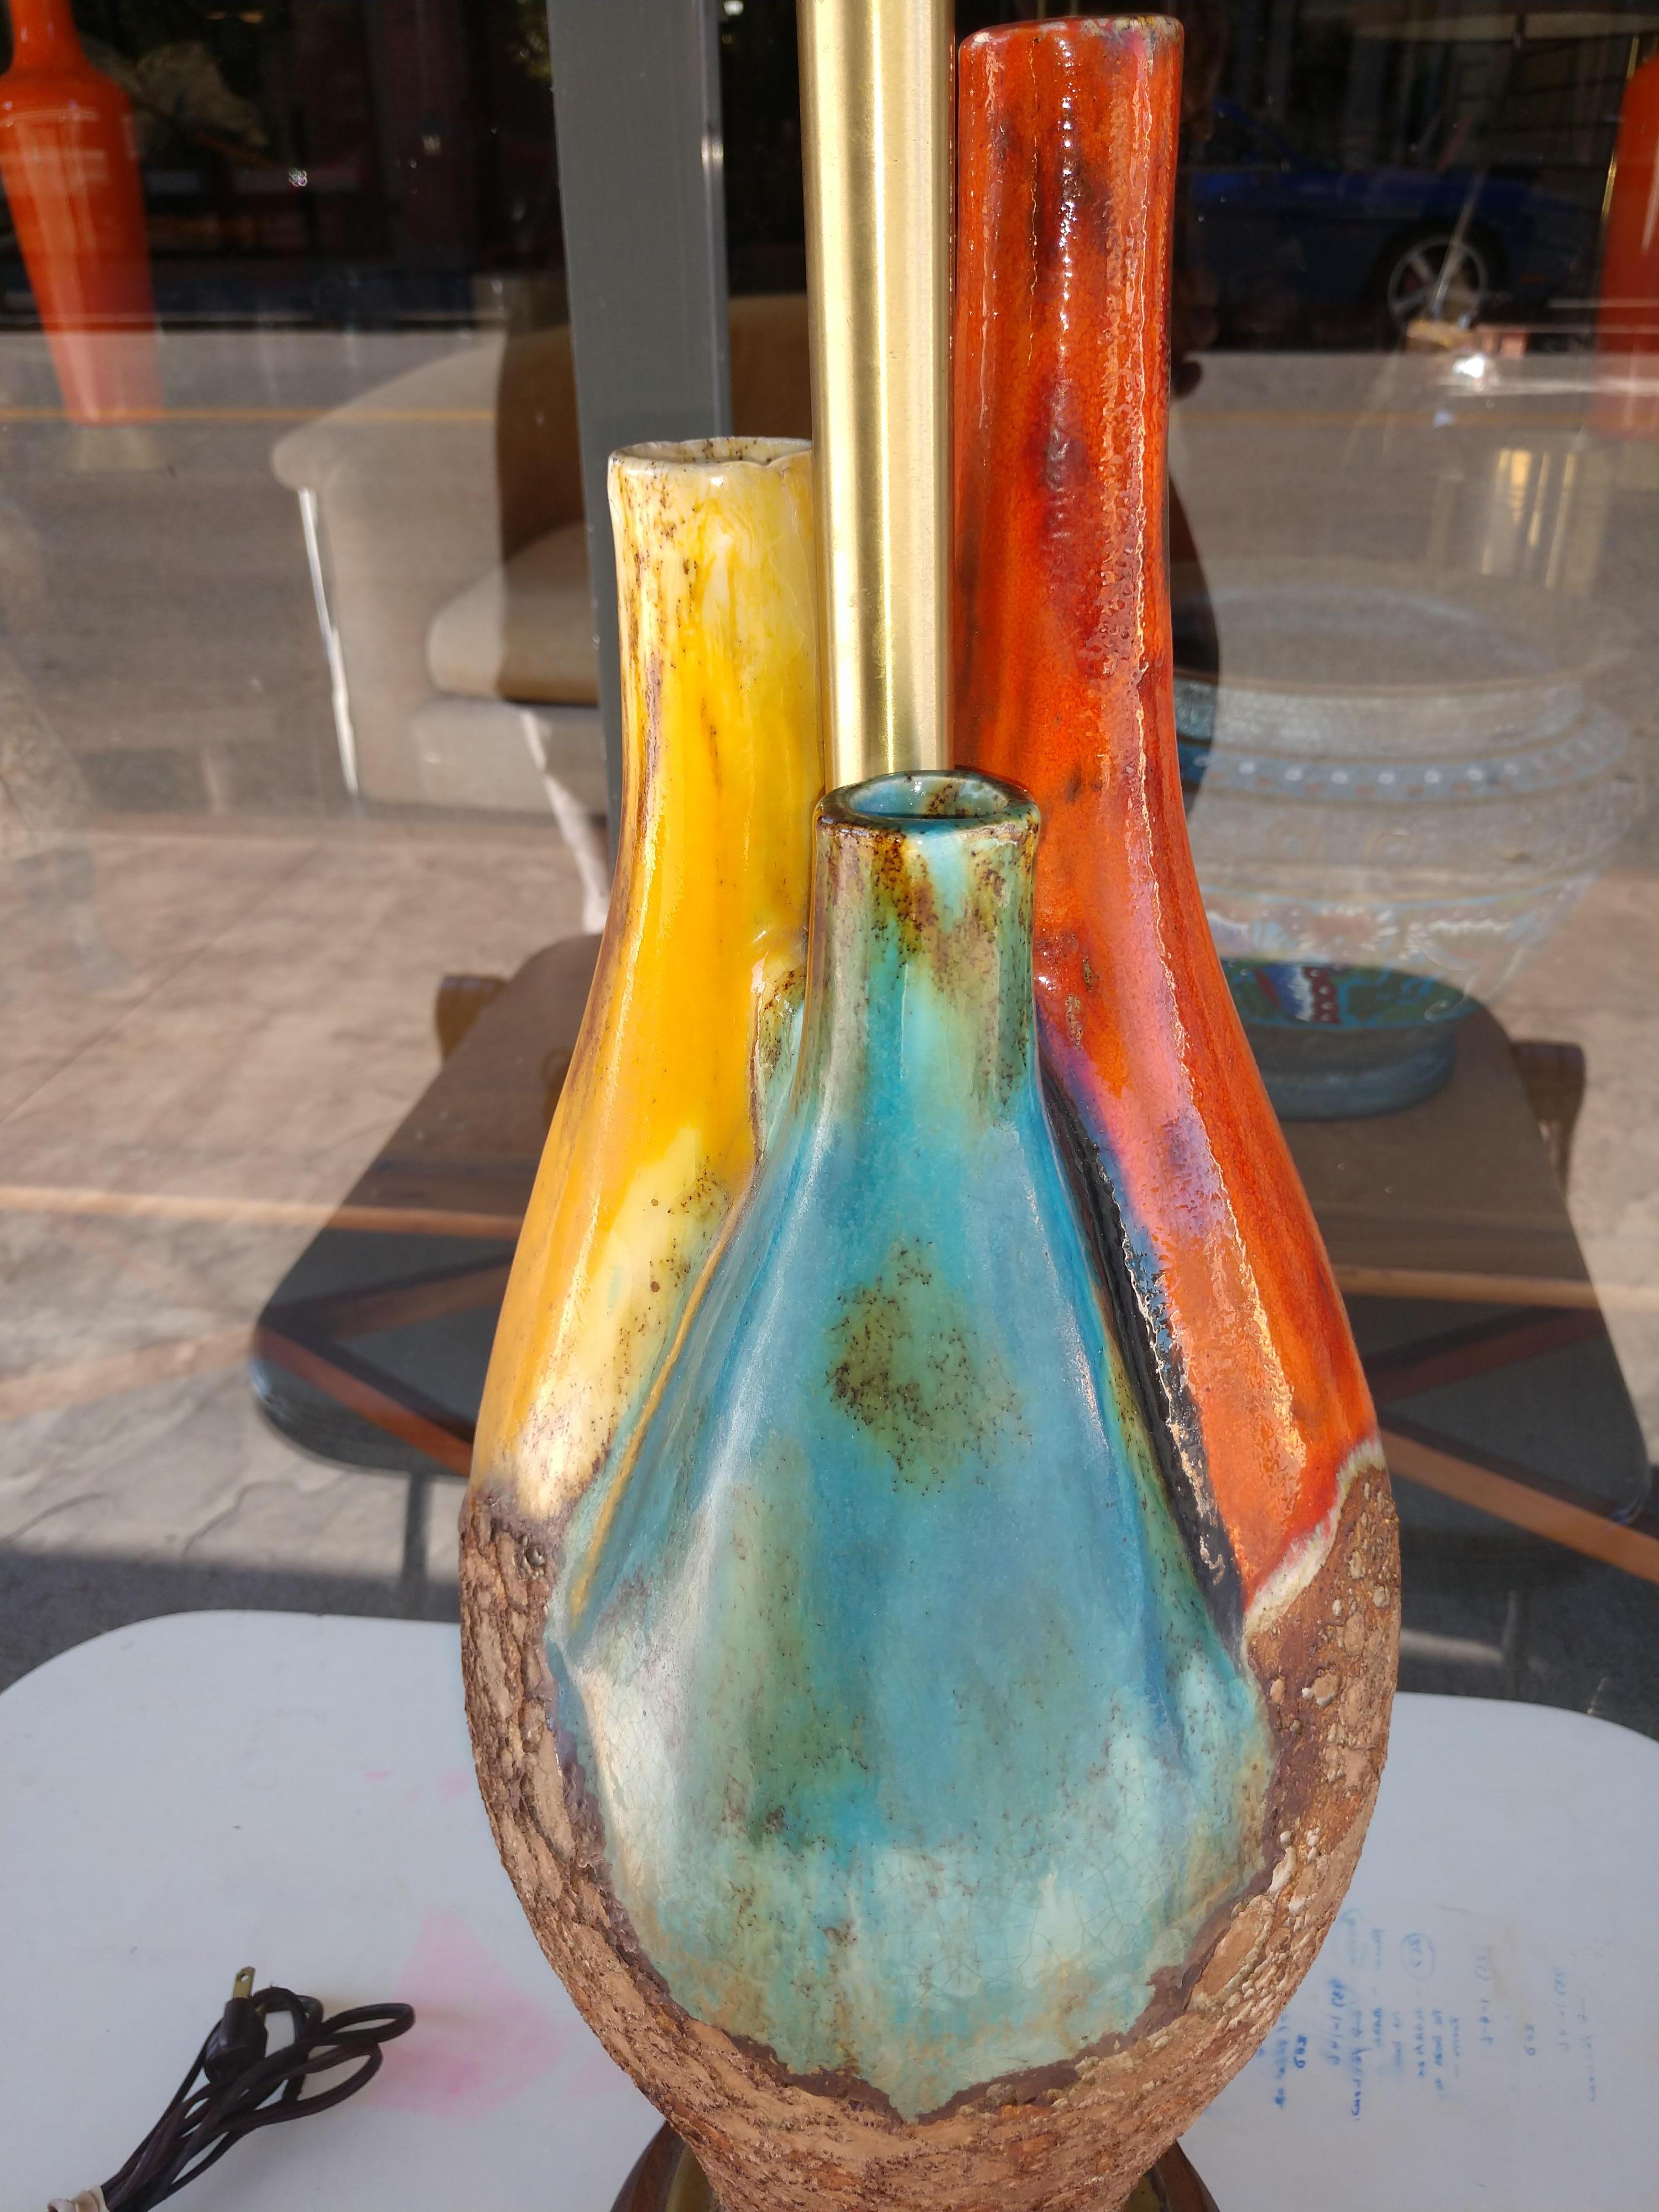 Pair of Mid-Century Modern Pottery Lamps in a TRI Bottle Form 1